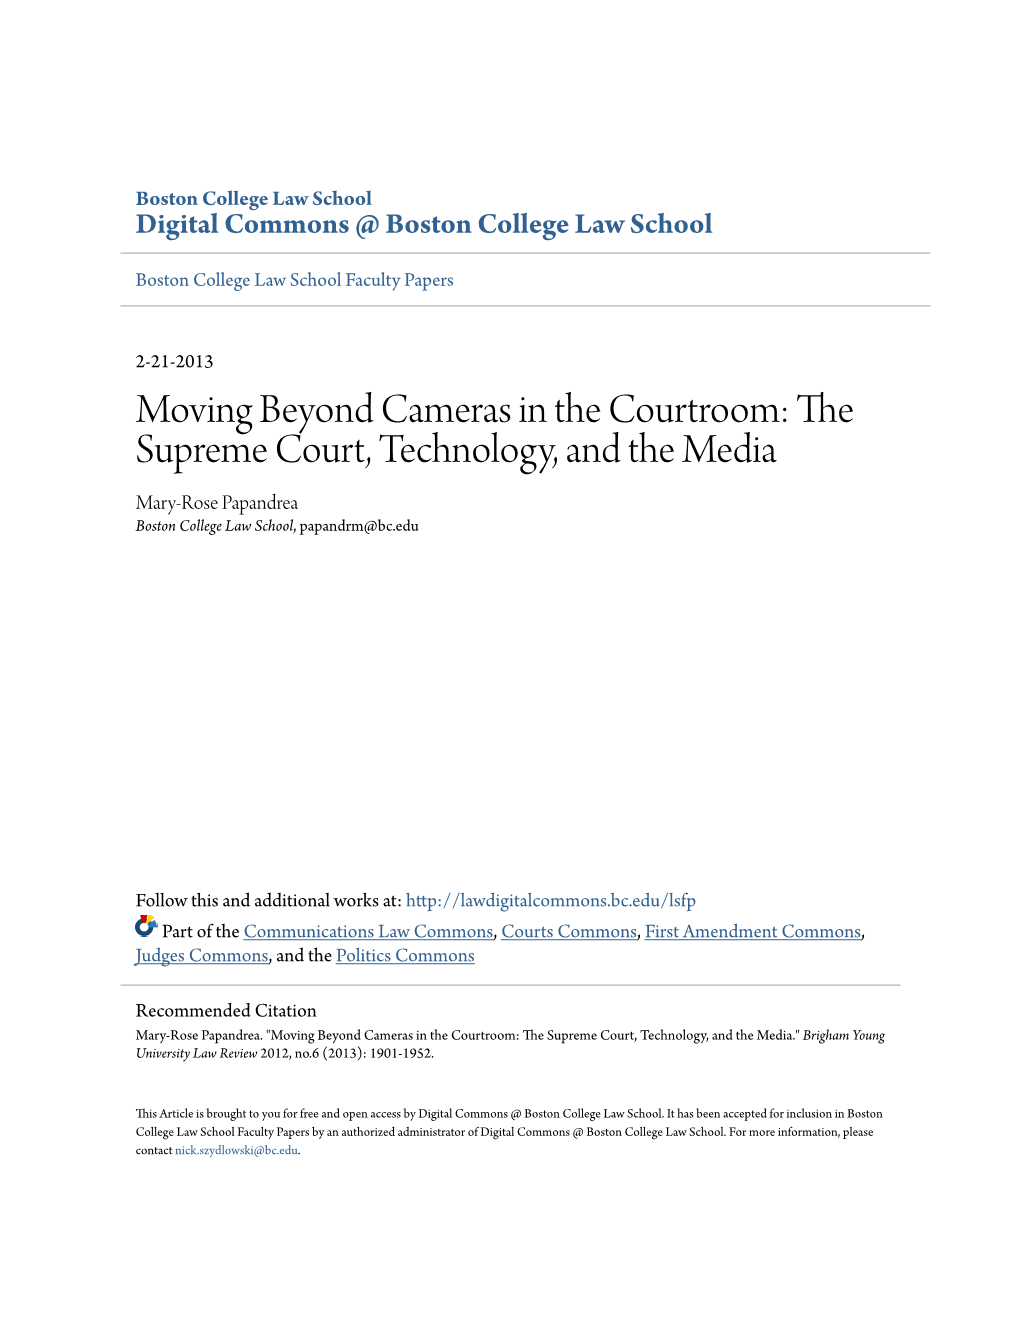 Moving Beyond Cameras in the Courtroom: the Supreme Court, Technology, and the Media Mary-Rose Papandrea Boston College Law School, Papandrm@Bc.Edu